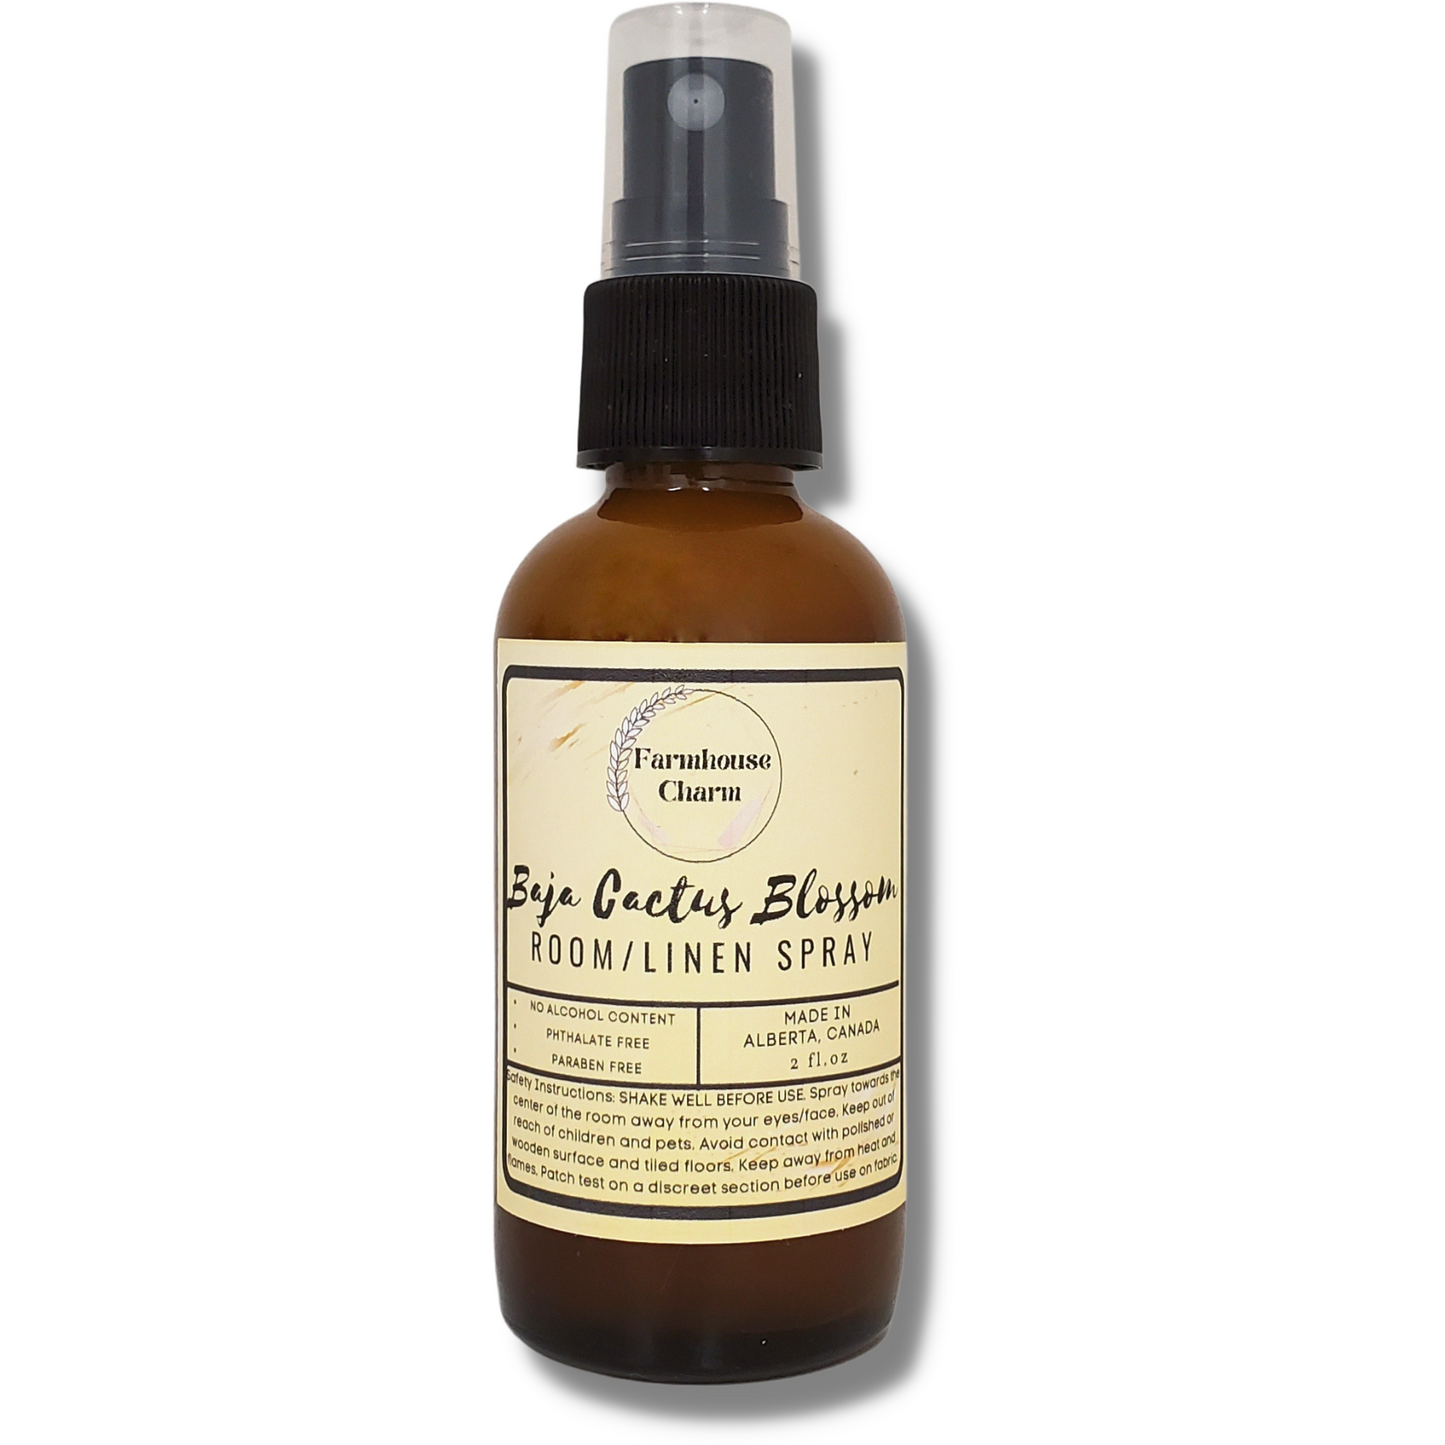 Baja Cactus Blossom Room and Linen Spray- Farmhouse Charm is a refreshing blend of florals and light coconut with sandalwood and soothing musk base..  Baja Cactus Blossom Room and Linen Spray- Farmhouse Charm  Net Weight: 2 oz No Alcohol Content Phthalate Free Paraben Free